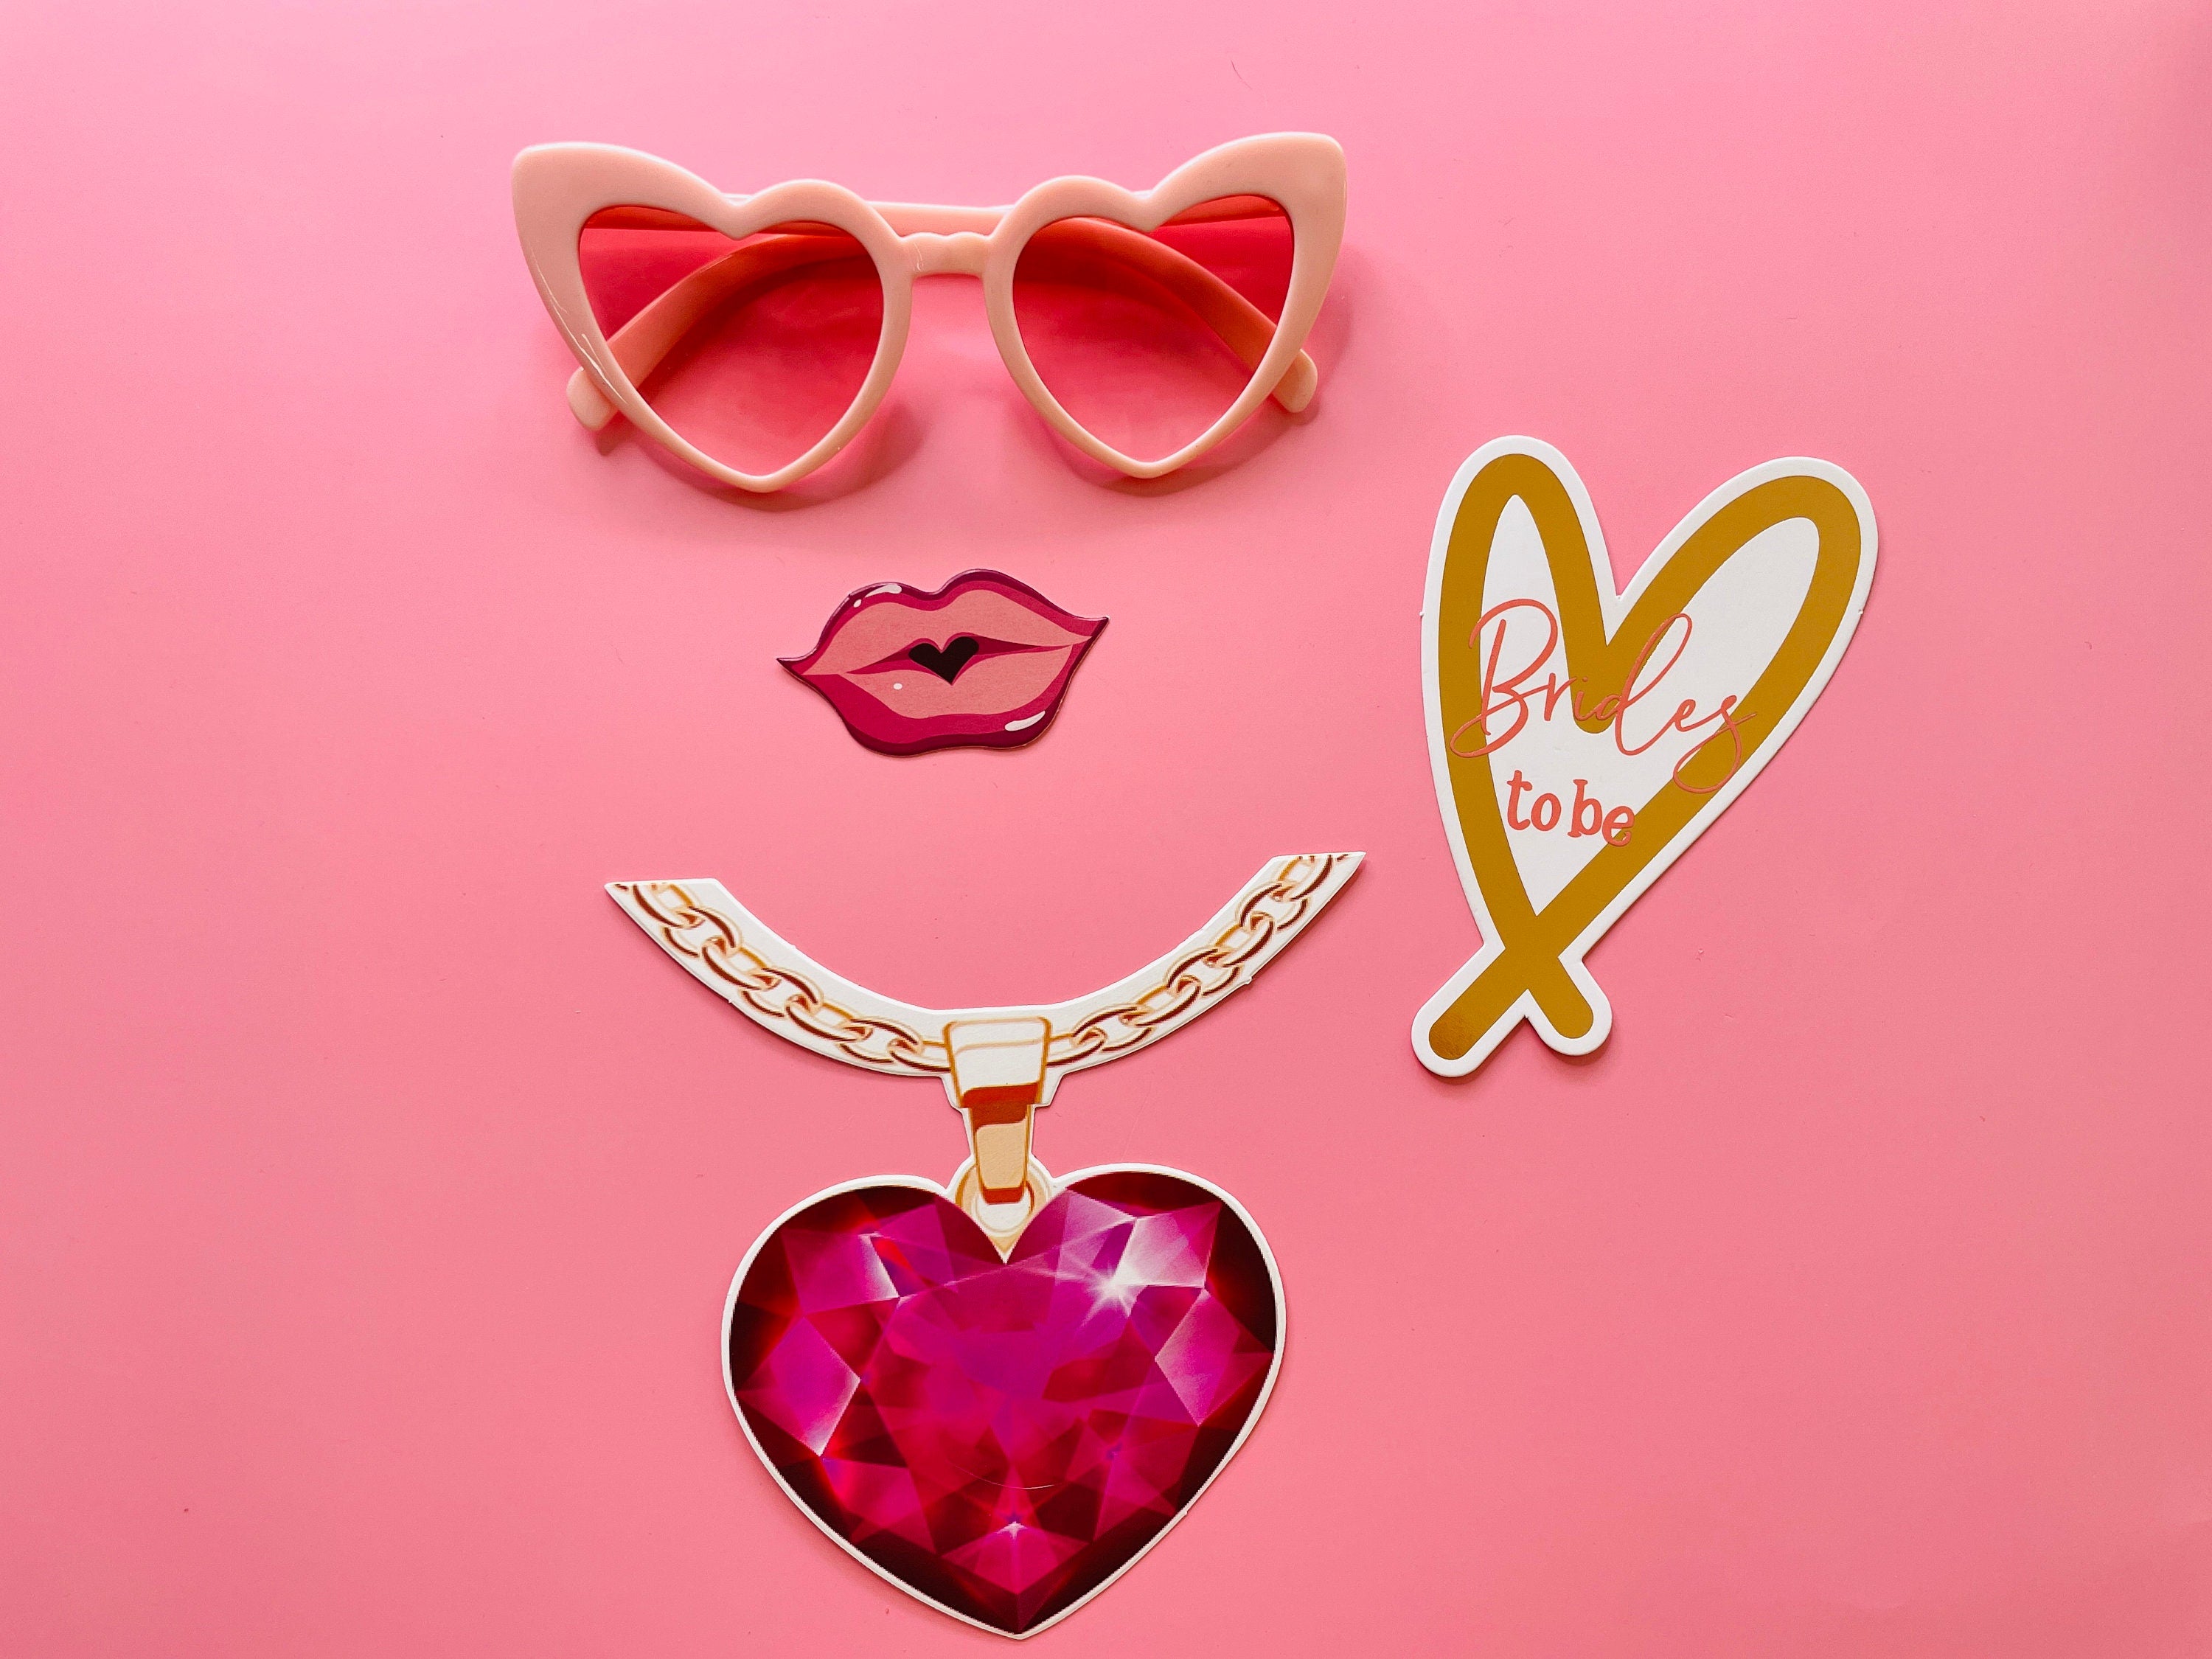 Groovy Hen Party Heart Shaped Sunglasses for Hen Do Bachelorette Night, Bridesmaid Proposal Gift,  Bridesmaids Gifts, Party Souvenirs